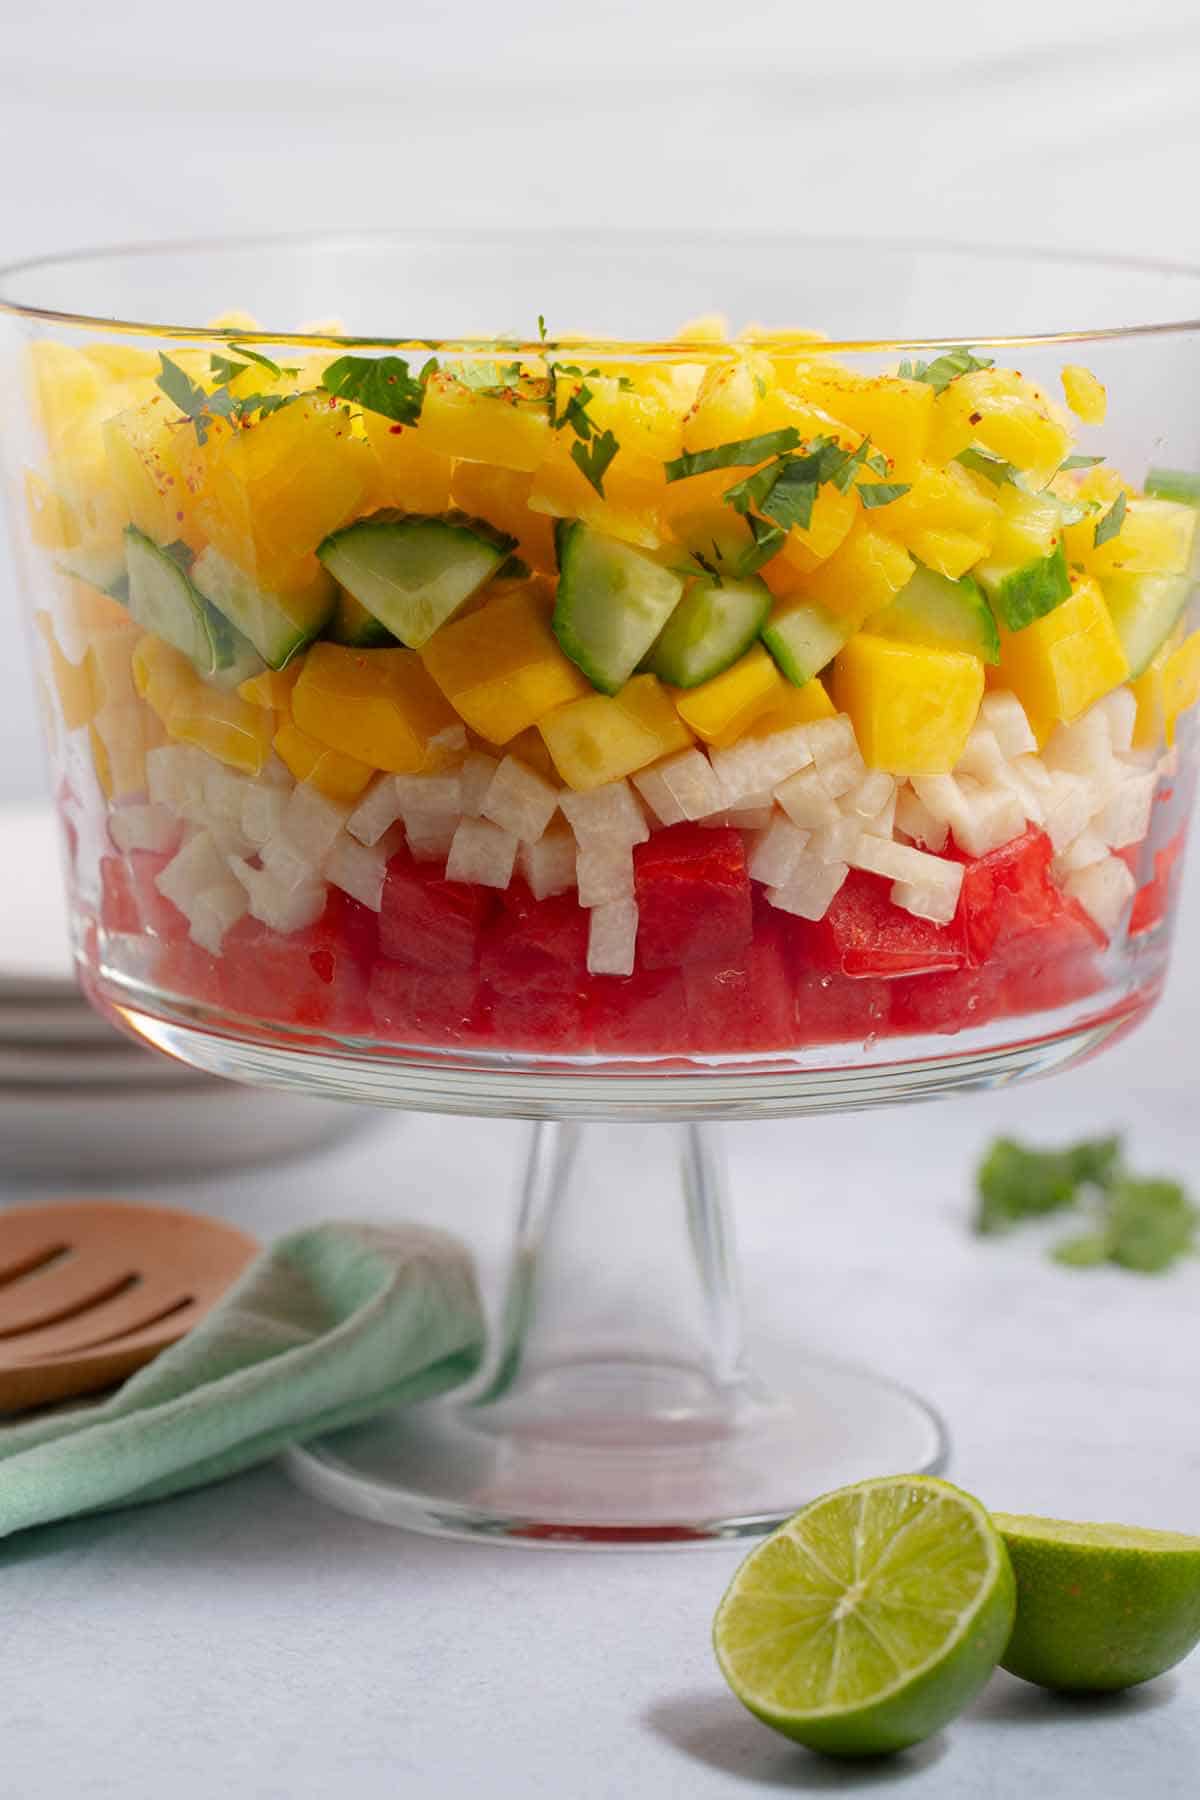 Layered ingredients of fruit salad in a glass trifle dish.